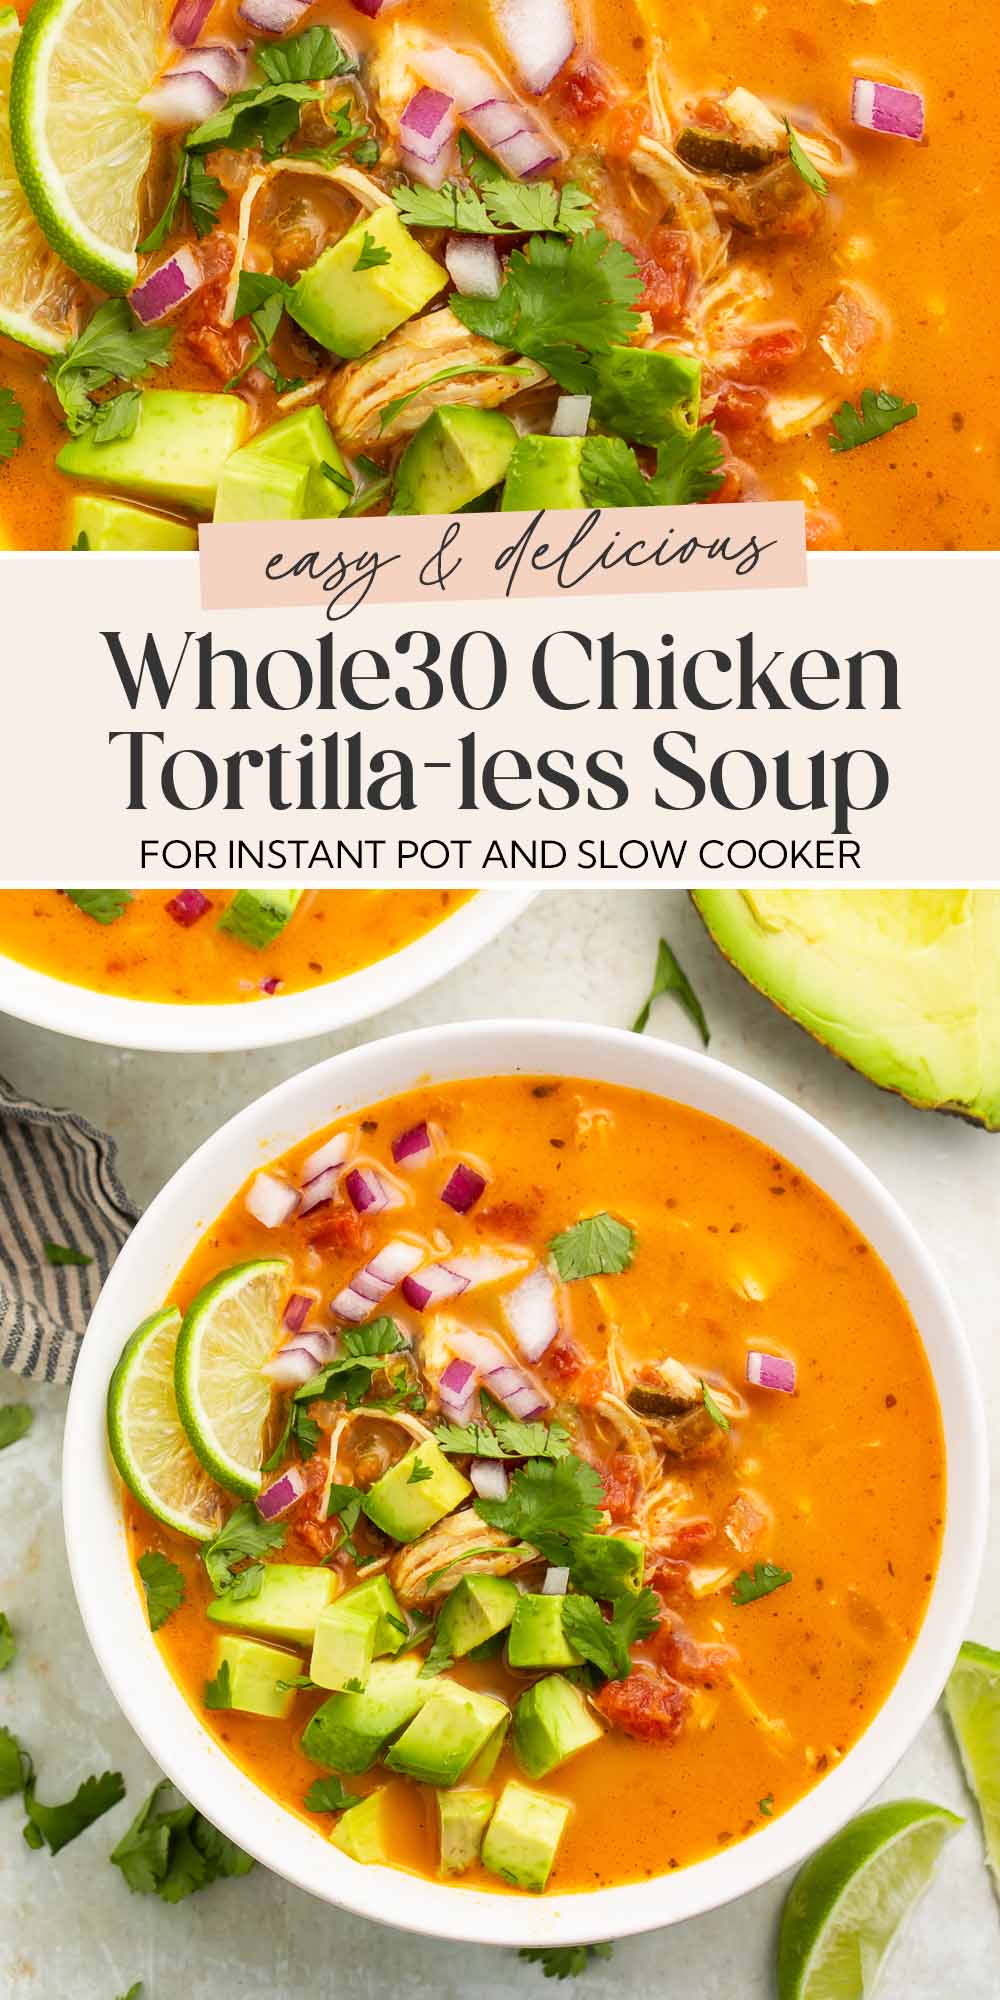 Pin graphic for Whole30 chicken tortilla-less soup.